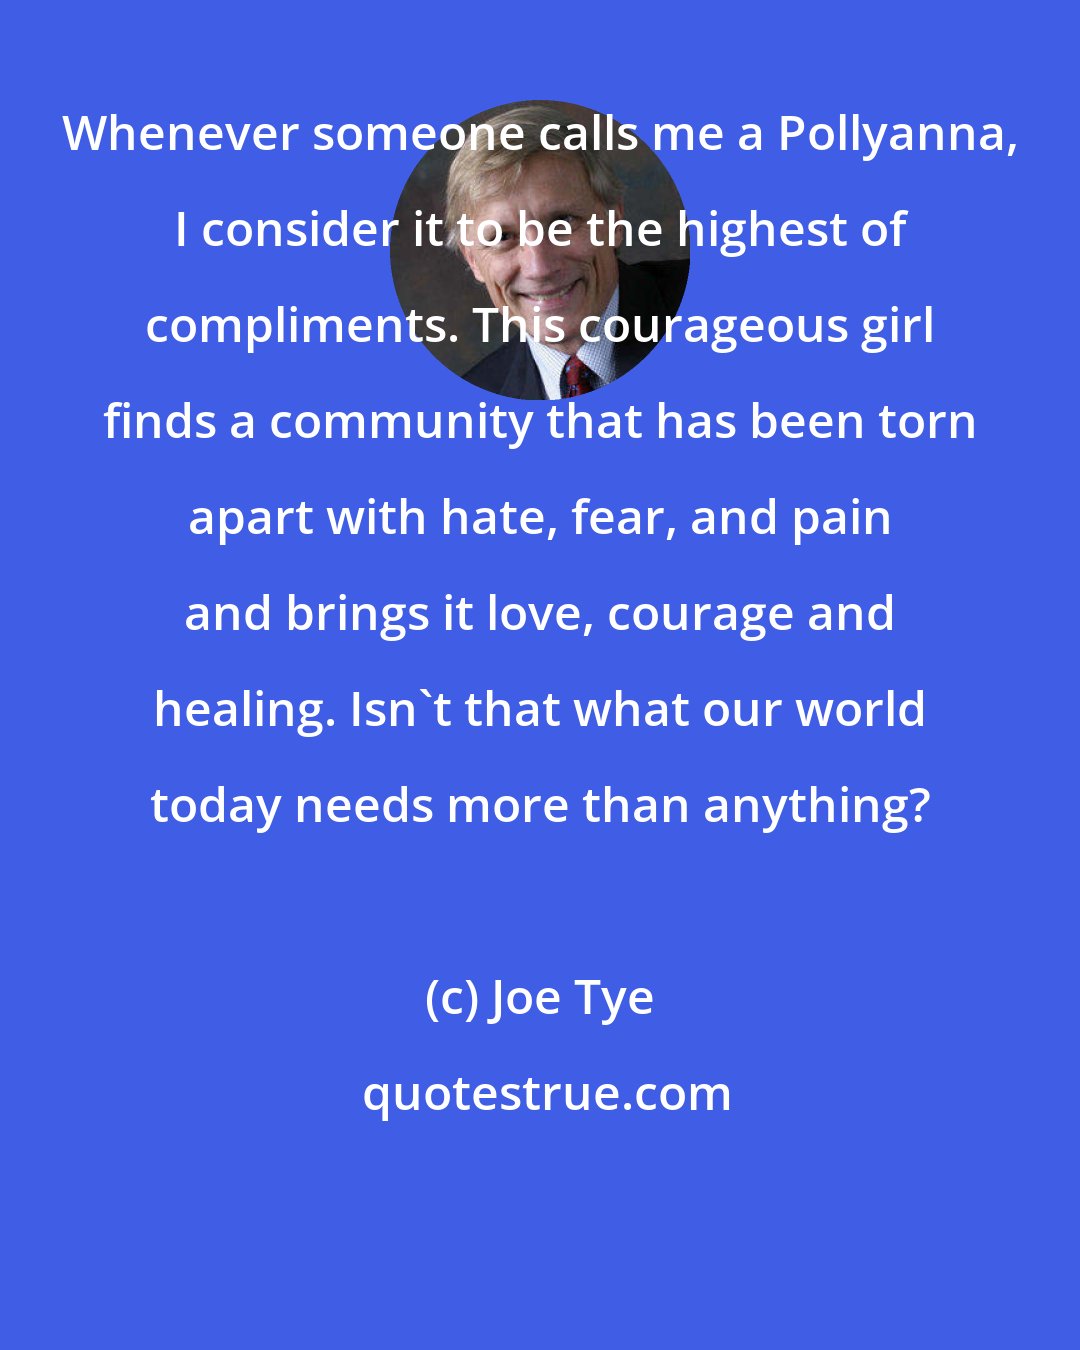 Joe Tye: Whenever someone calls me a Pollyanna, I consider it to be the highest of compliments. This courageous girl finds a community that has been torn apart with hate, fear, and pain and brings it love, courage and healing. Isn't that what our world today needs more than anything?